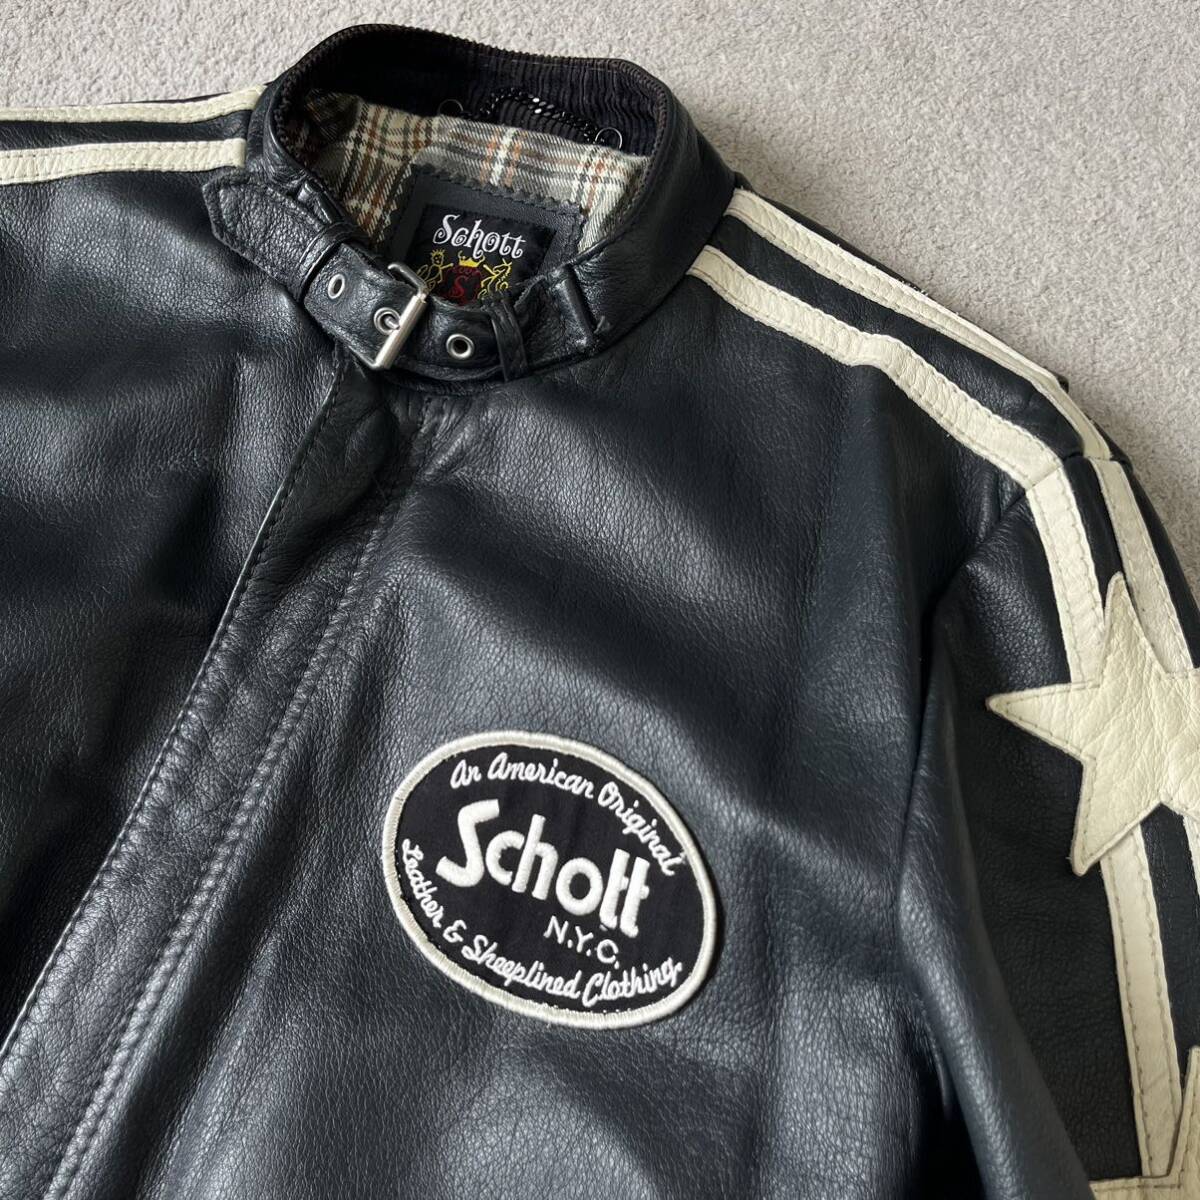 L size 100. year of model * Schott Schott Classic Racer jacket Rider's leather star article flag Star studs check single black 